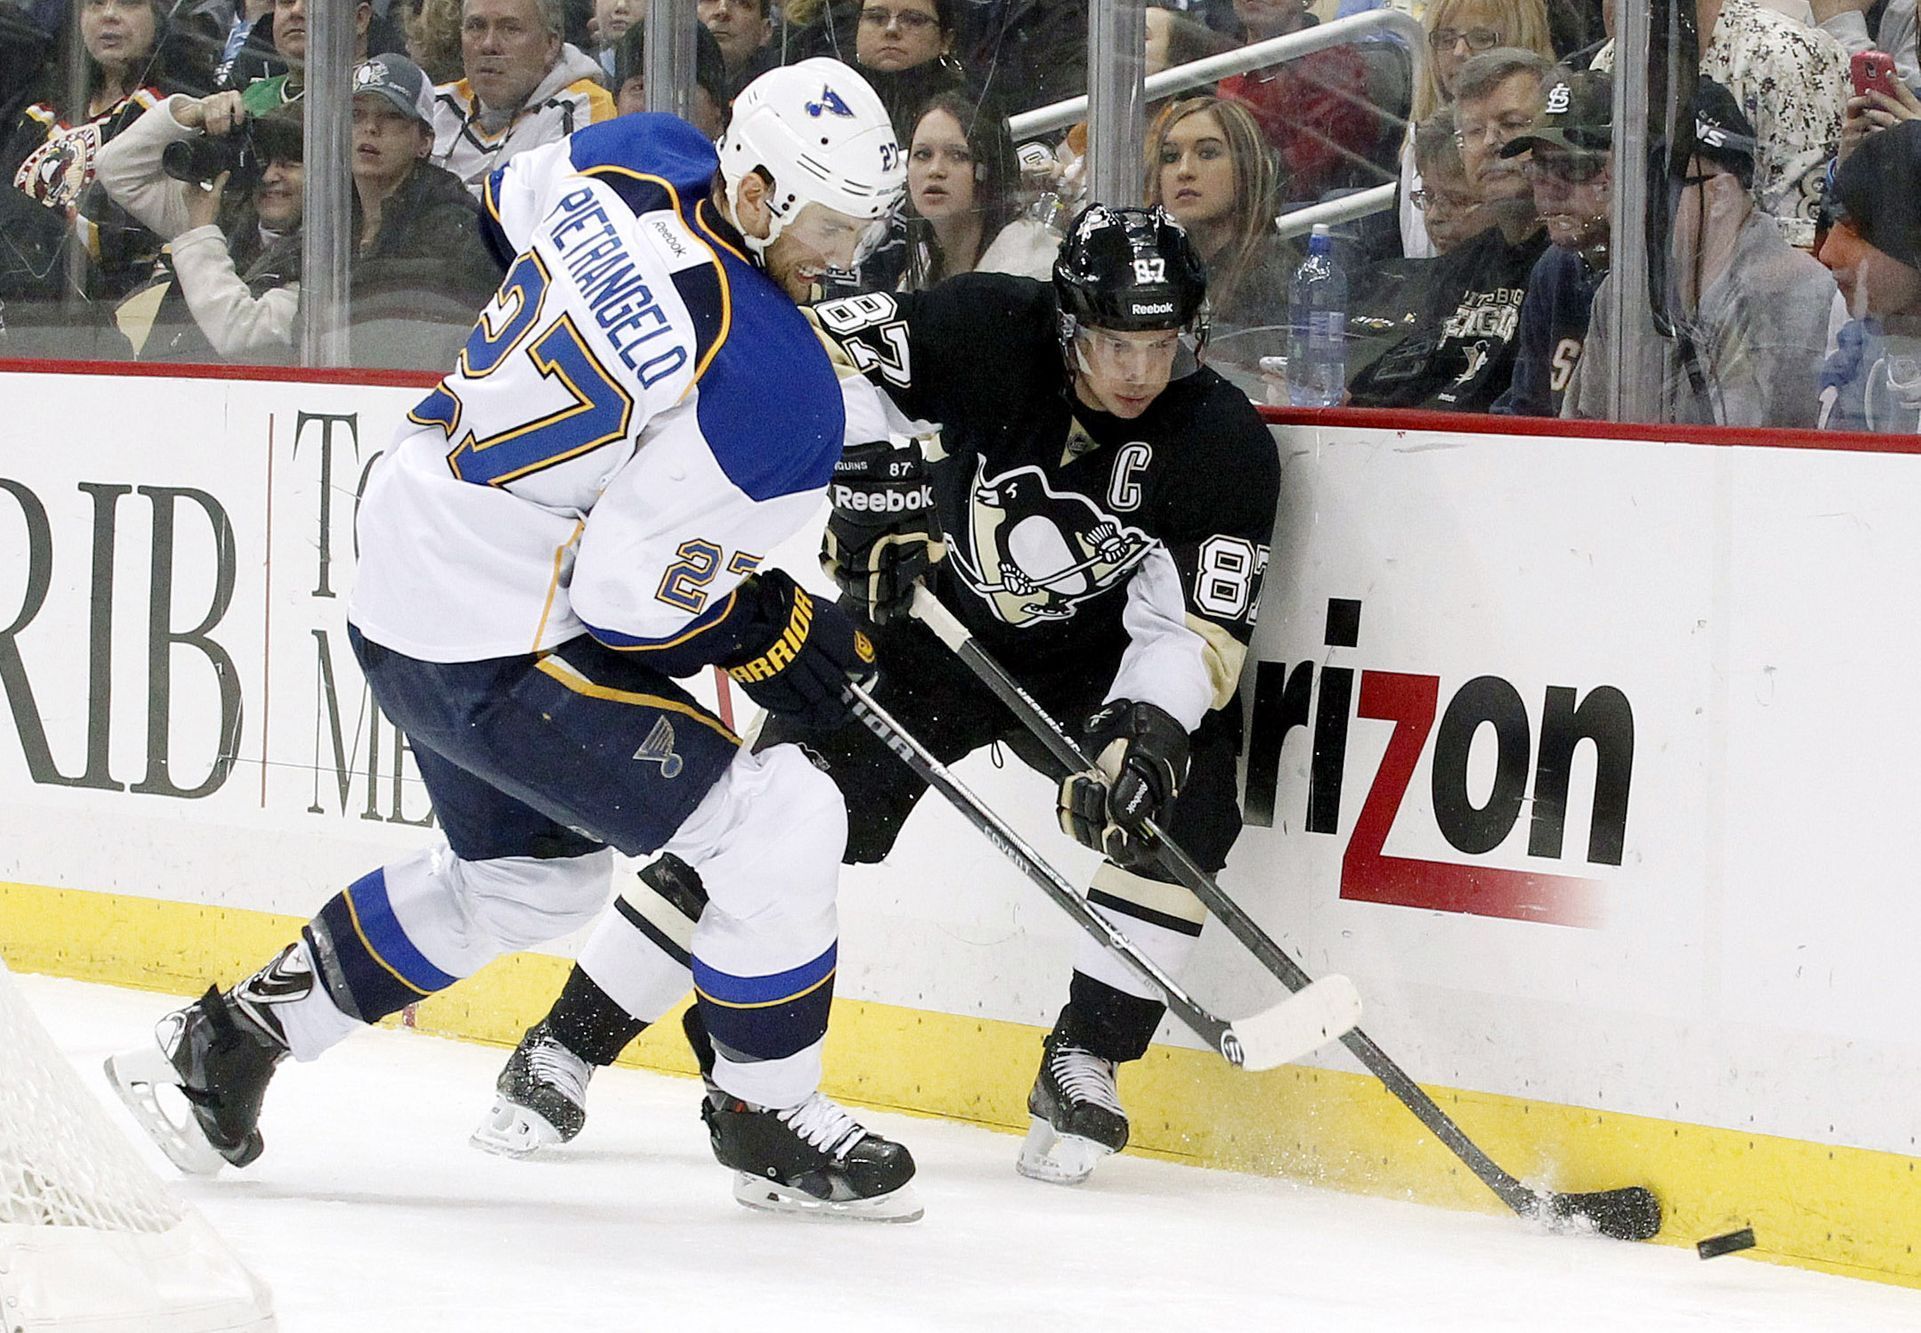 NHL: St. Louis Blues at Pittsburgh Penguins (Crosby a Pietrangelo)